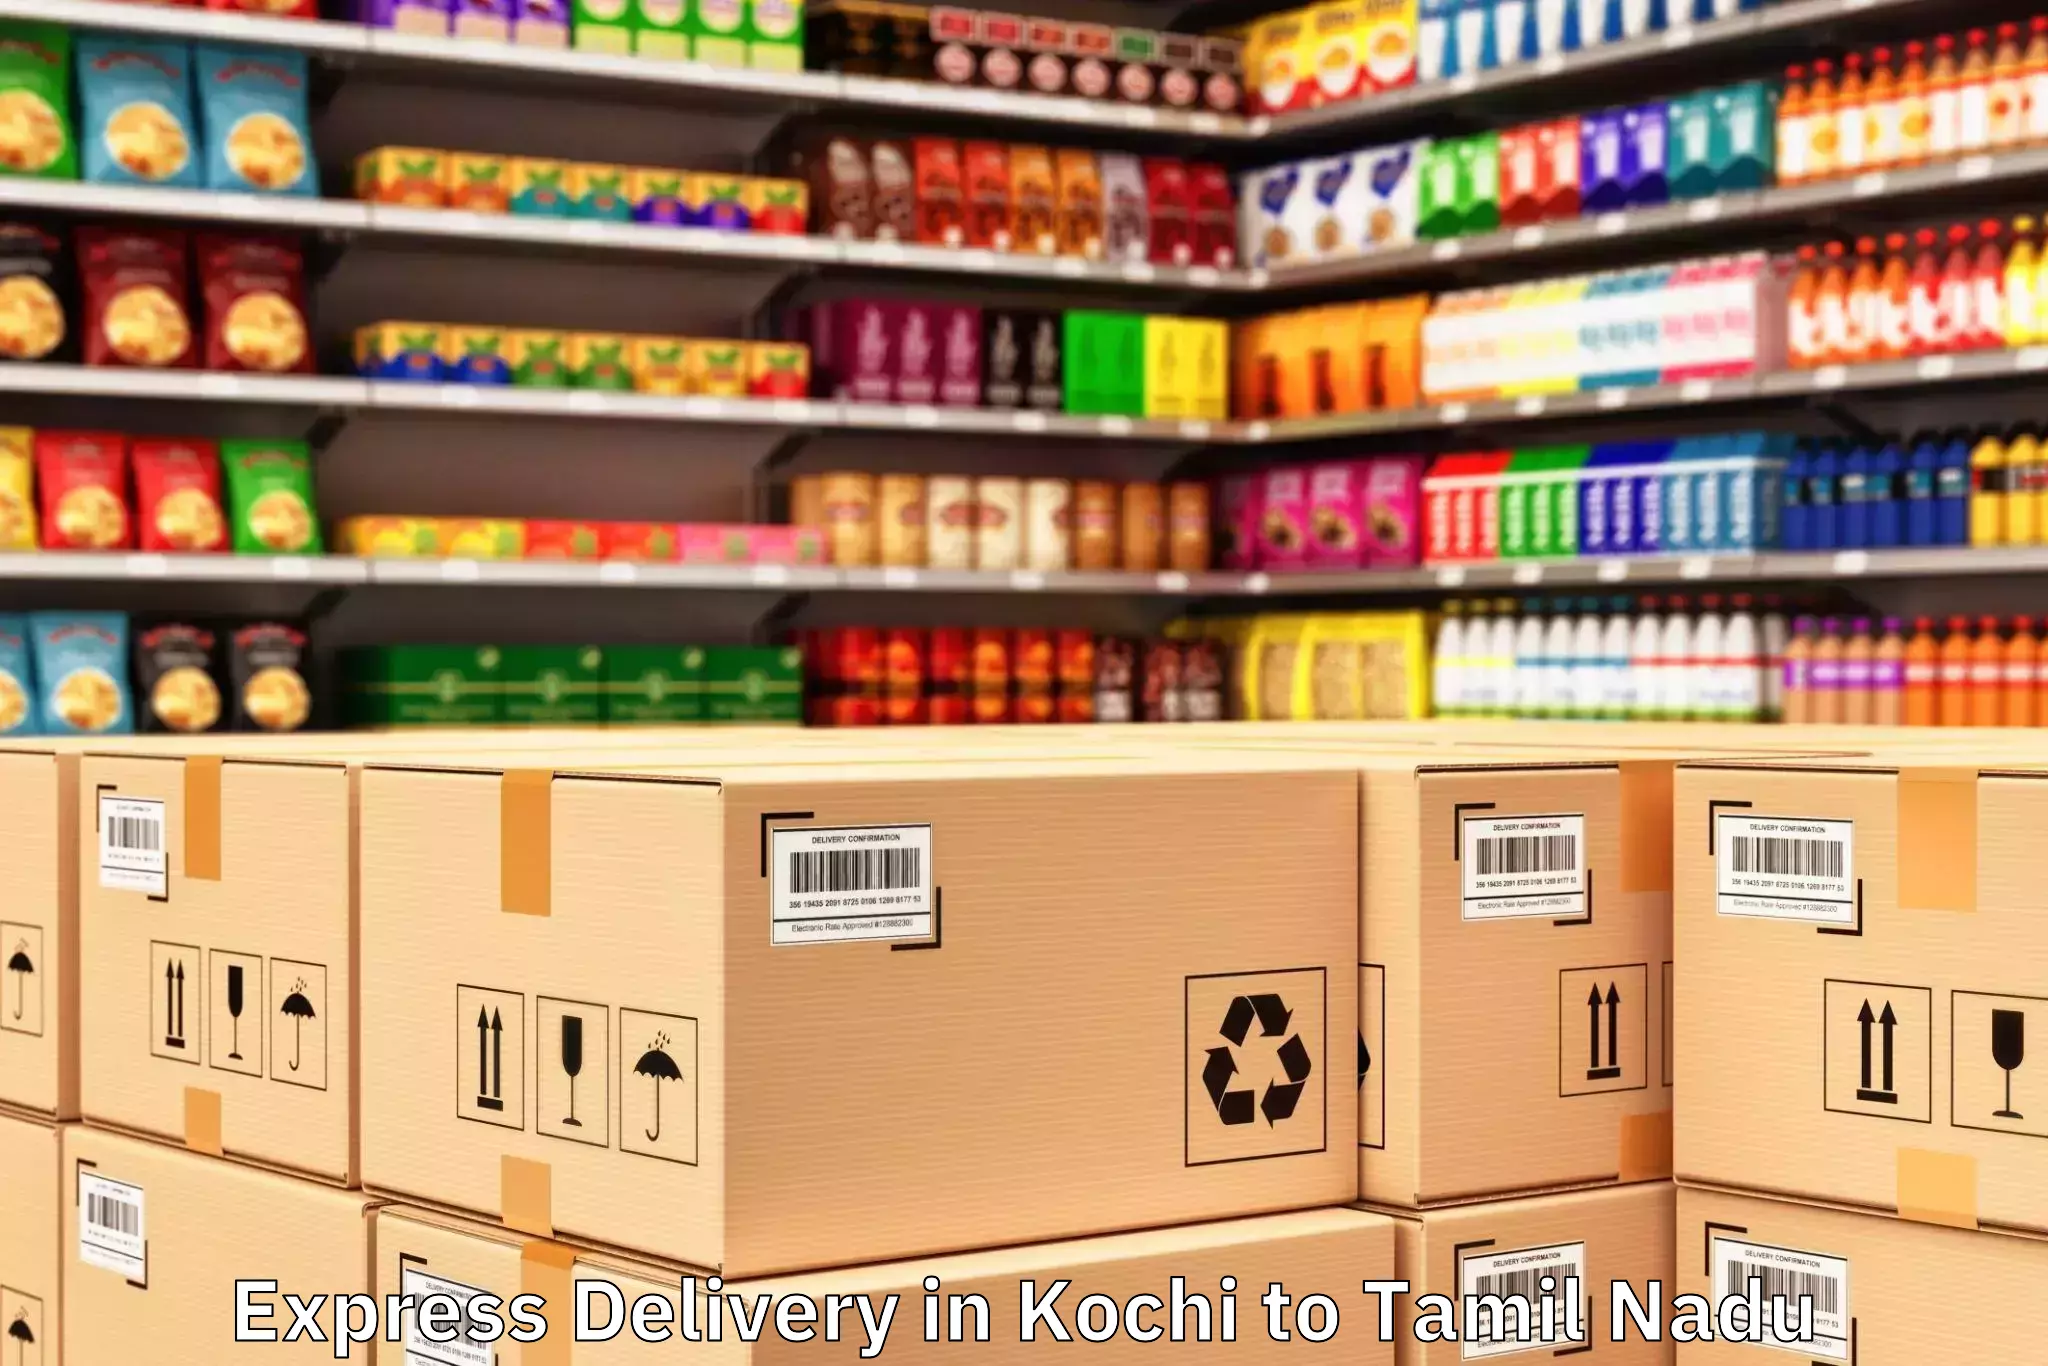 Get Kochi to Trichy Express Delivery